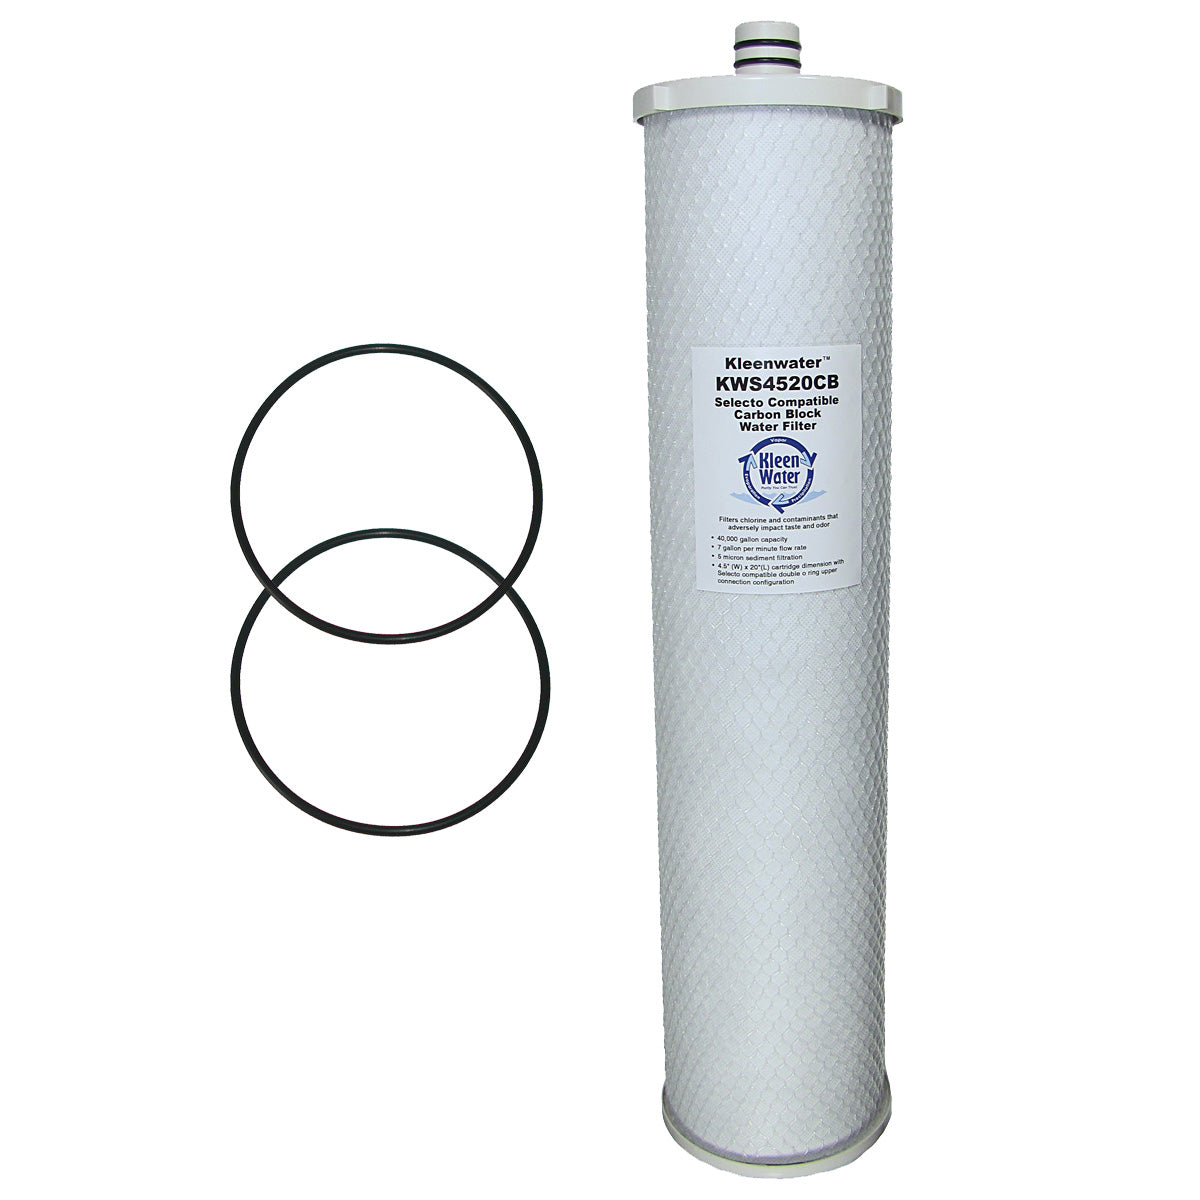 Selecto Scientific MF 620 System Compatible Filter with Orings